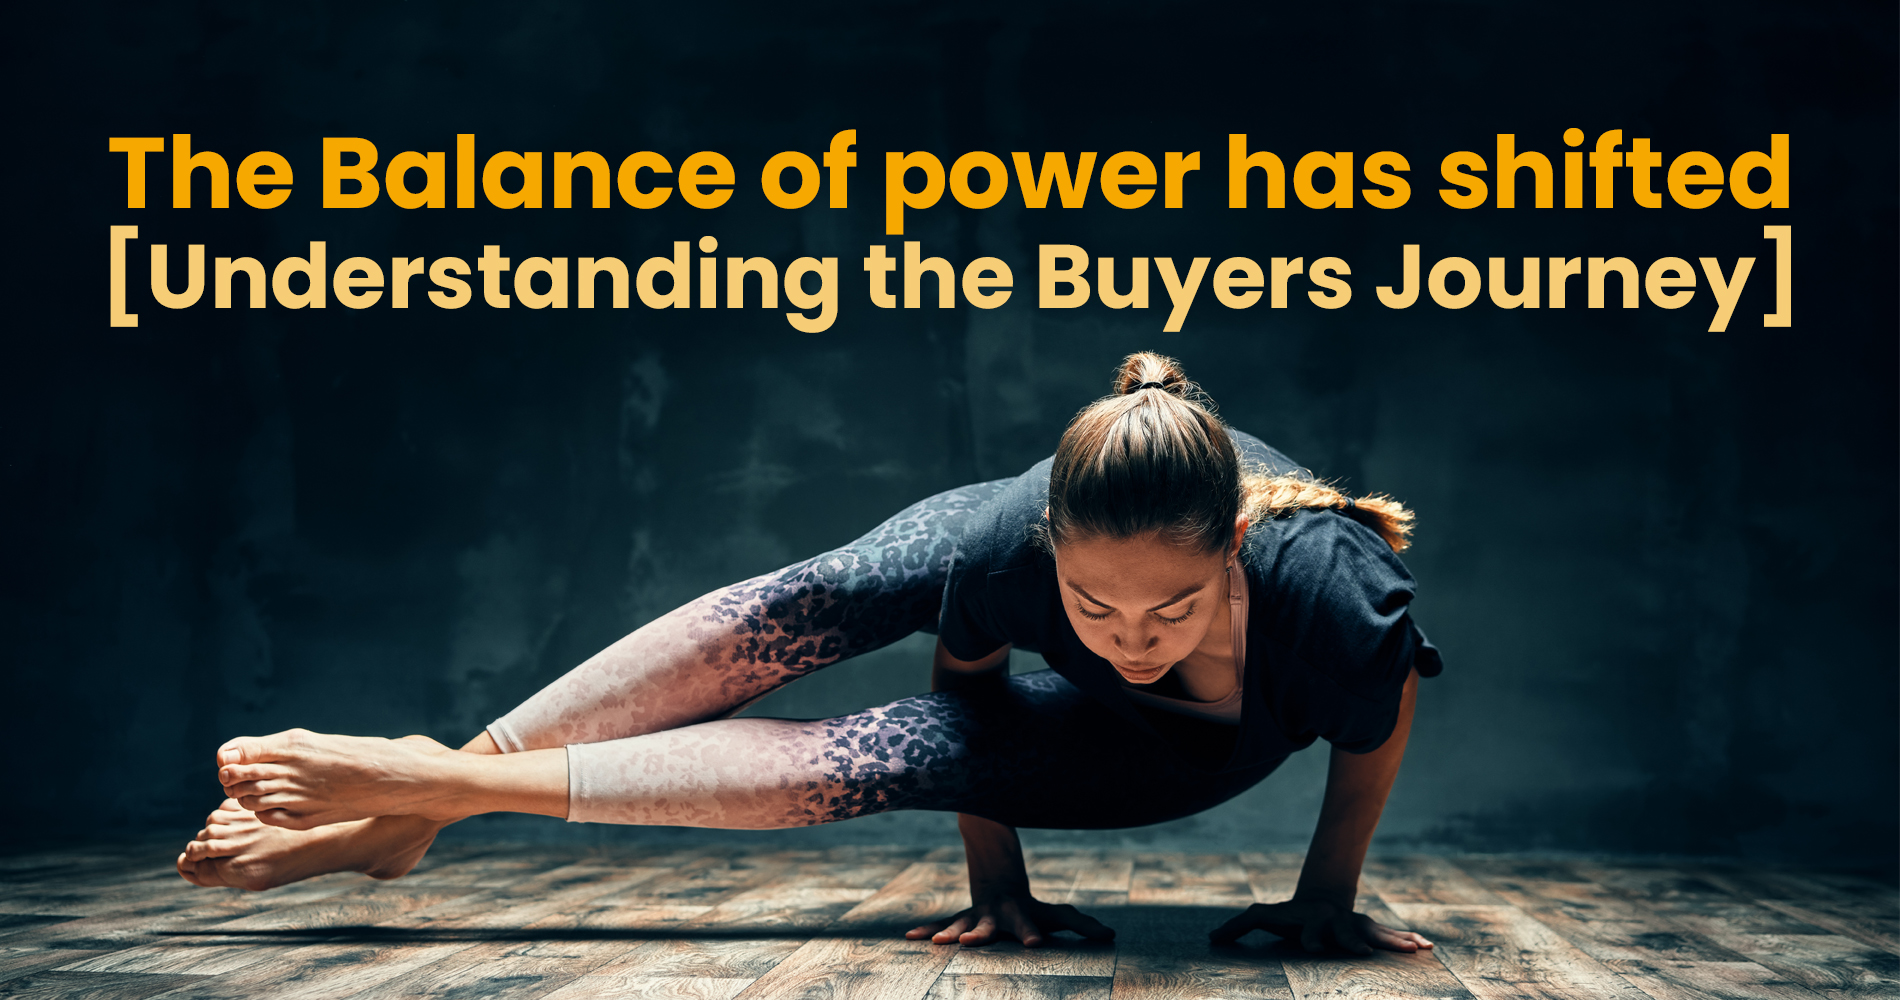 The Balance of power has shifted - Understanding the Buyers Journey